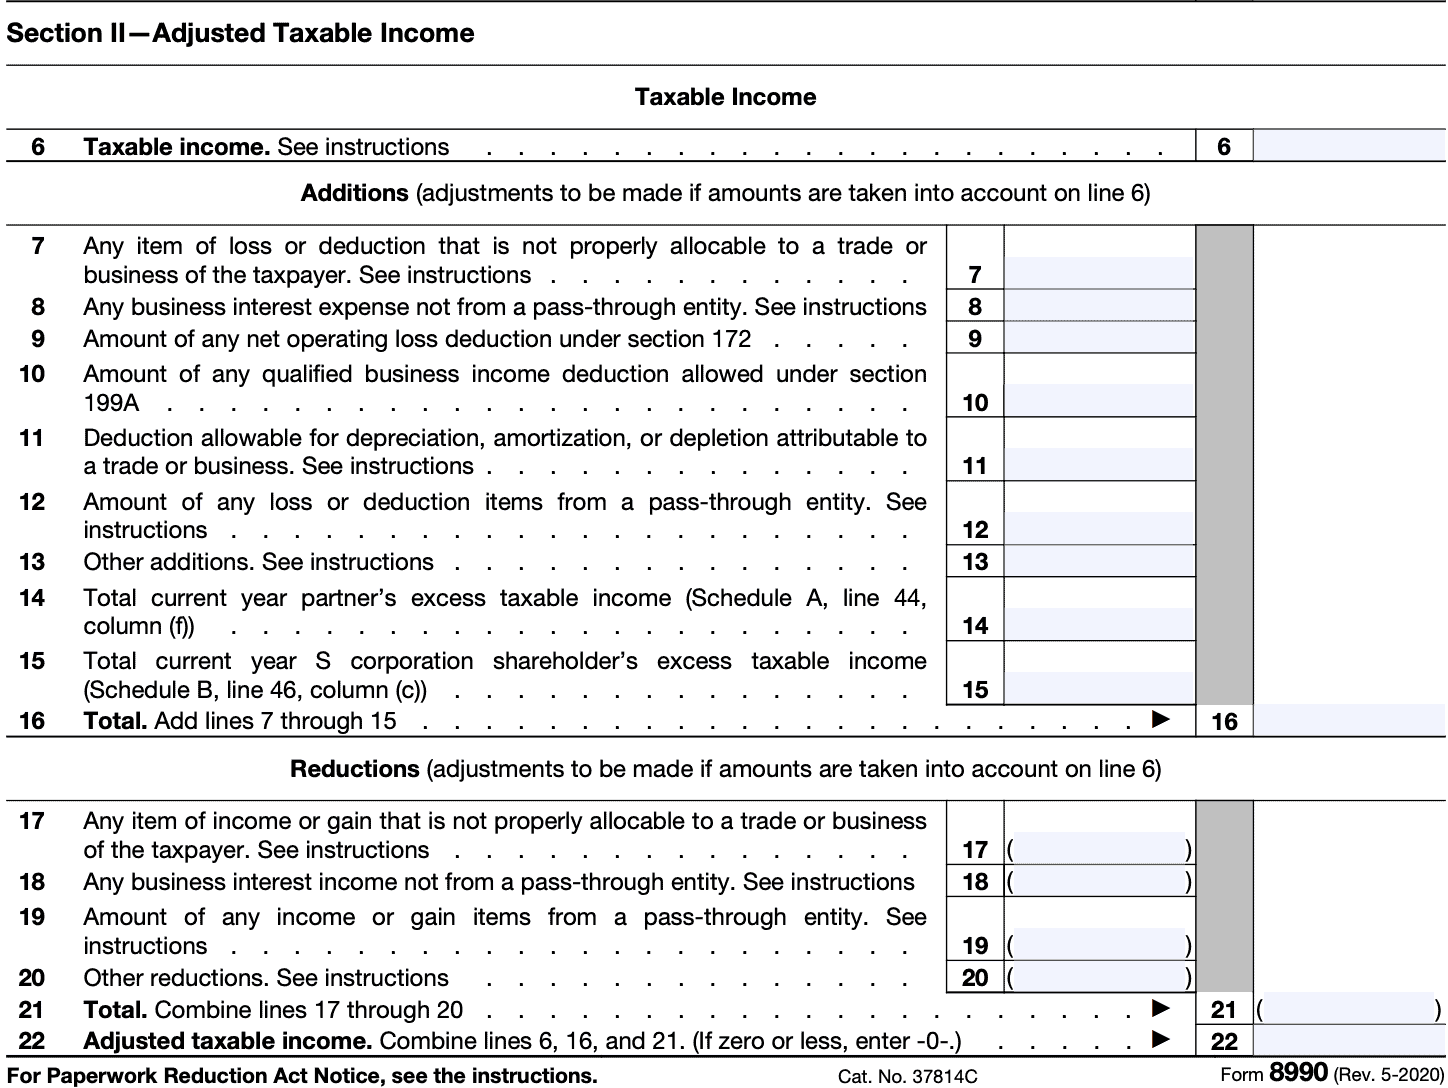 irs form 8990 section ii: adjusted taxable income